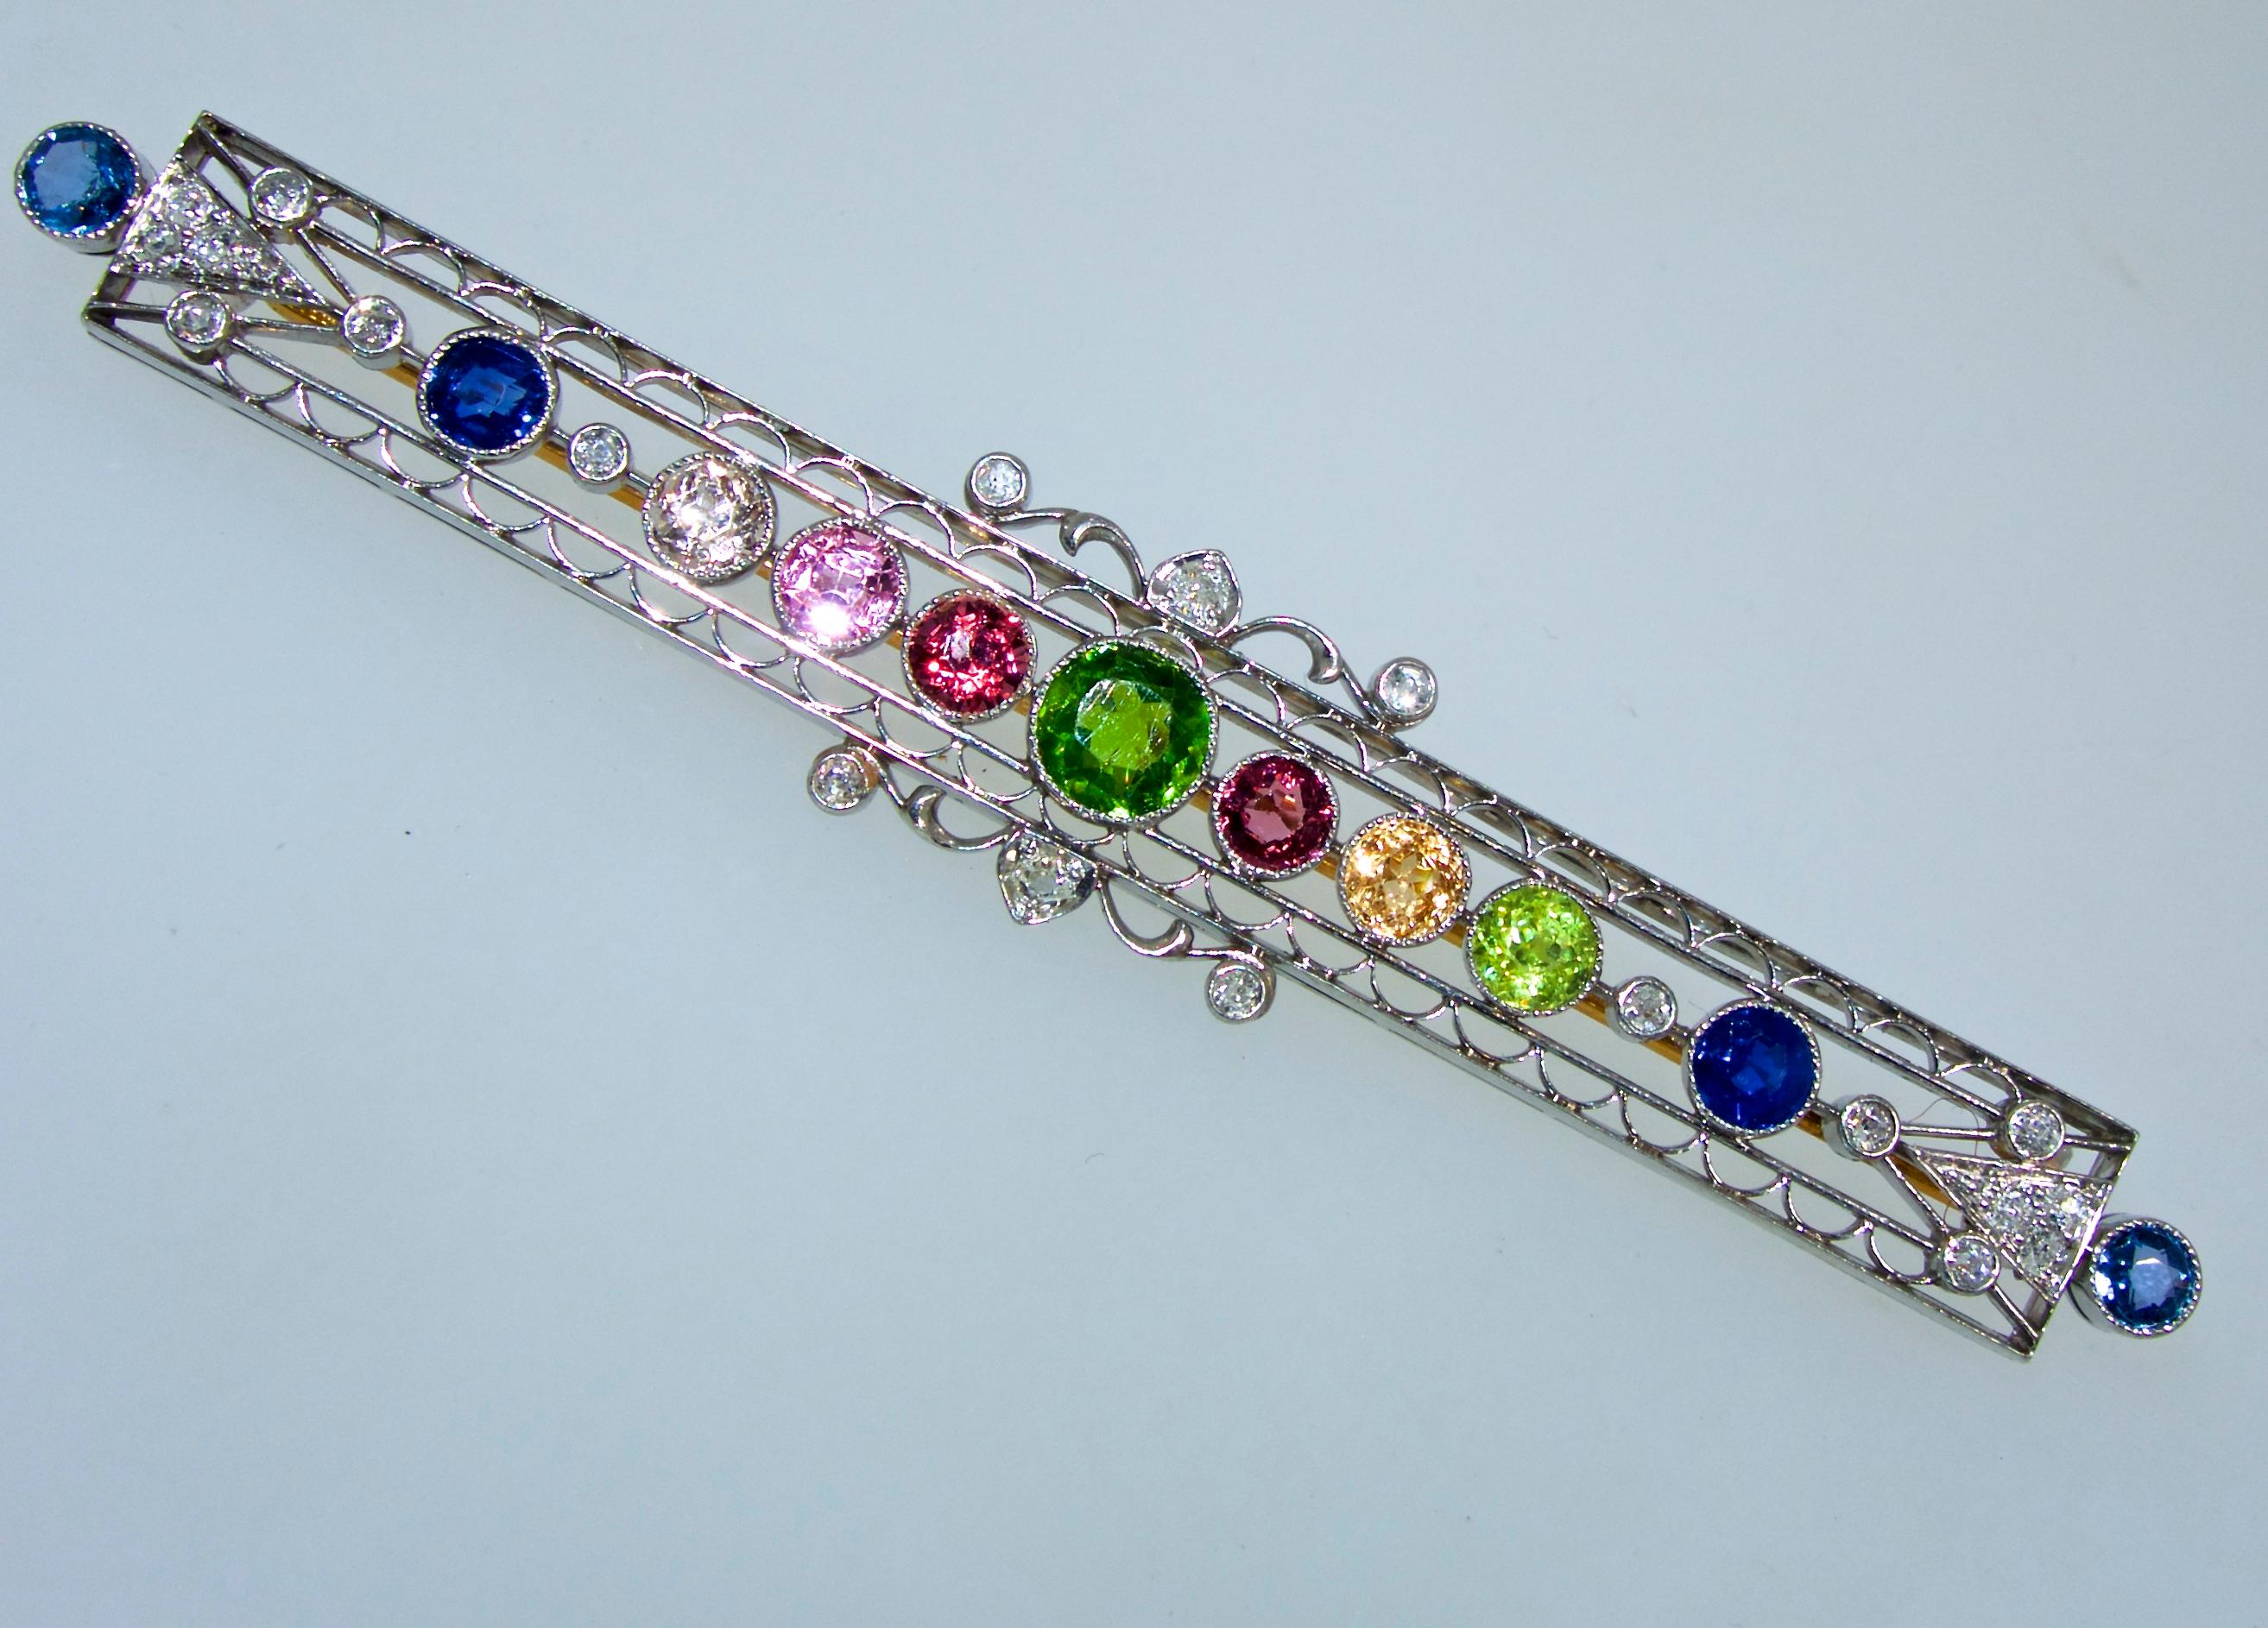 The center Demantoid green garnet is from the Ural Mountains in Russia and not mined today making this small 6.0 mm stone a rarity.  Flanked on both sides are fine bright sapphires, red garnets, topaz and diamonds.  This brooch is platinum topped